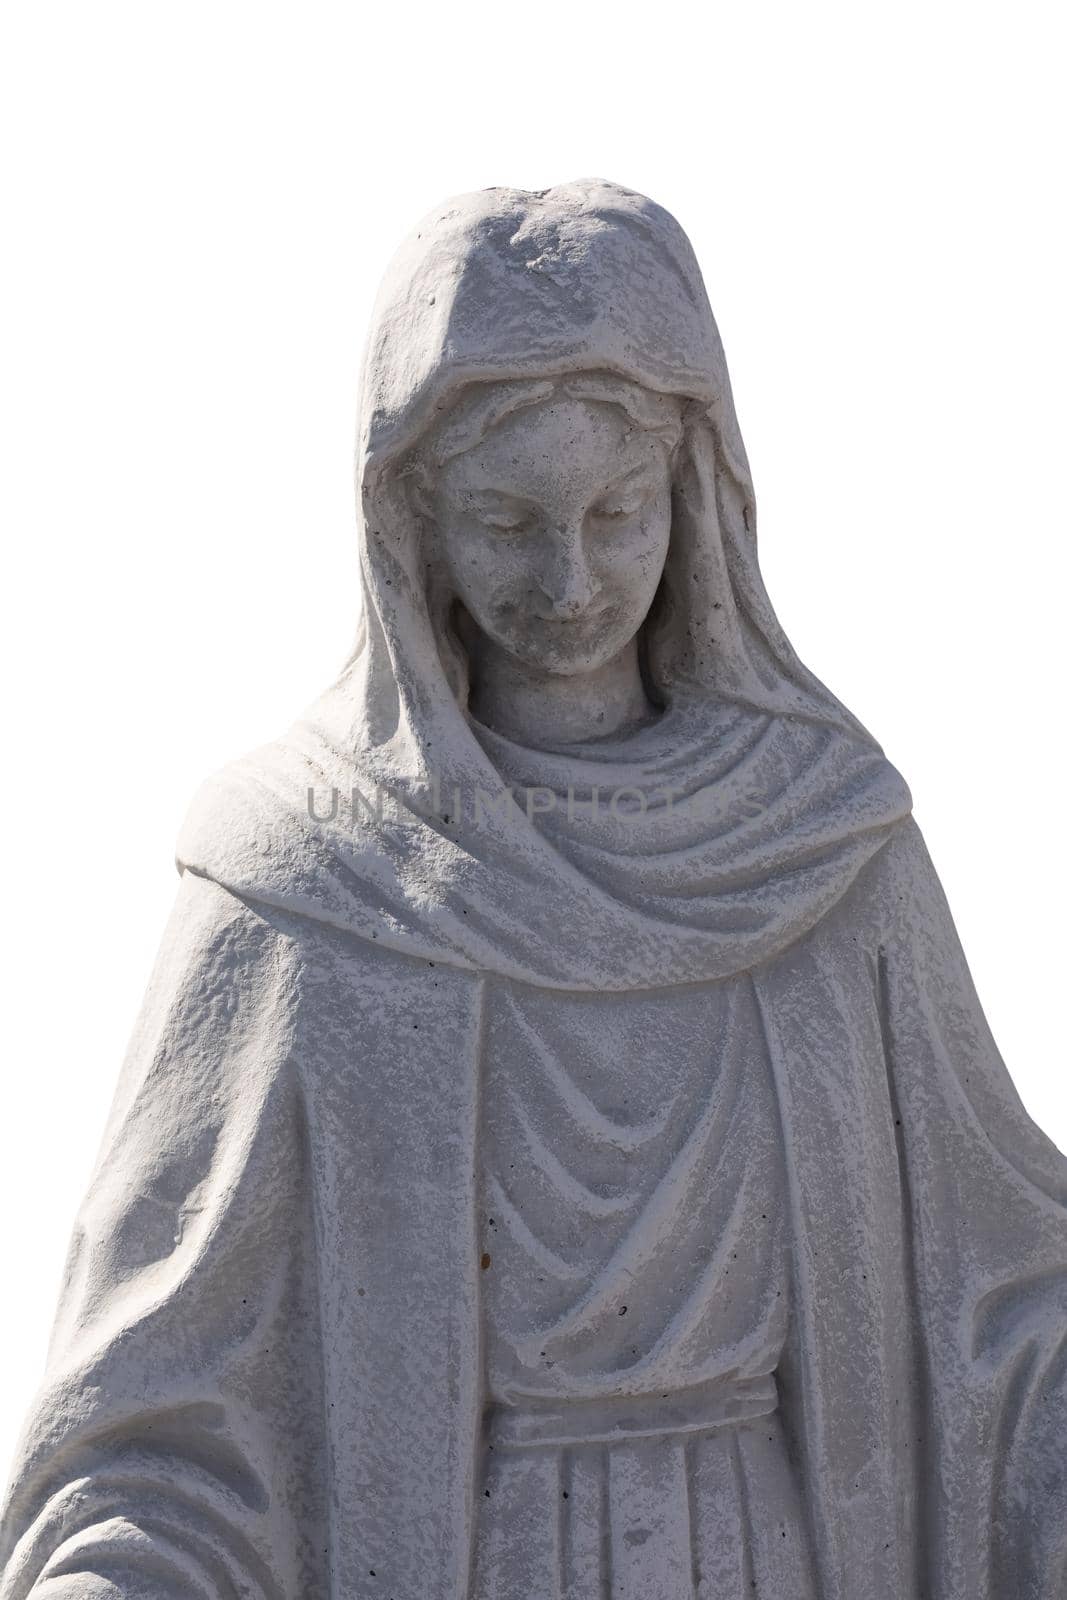 Close up of stone sculpture of virgin mary on white background. art and classical style romantic figurative stone sculpture.